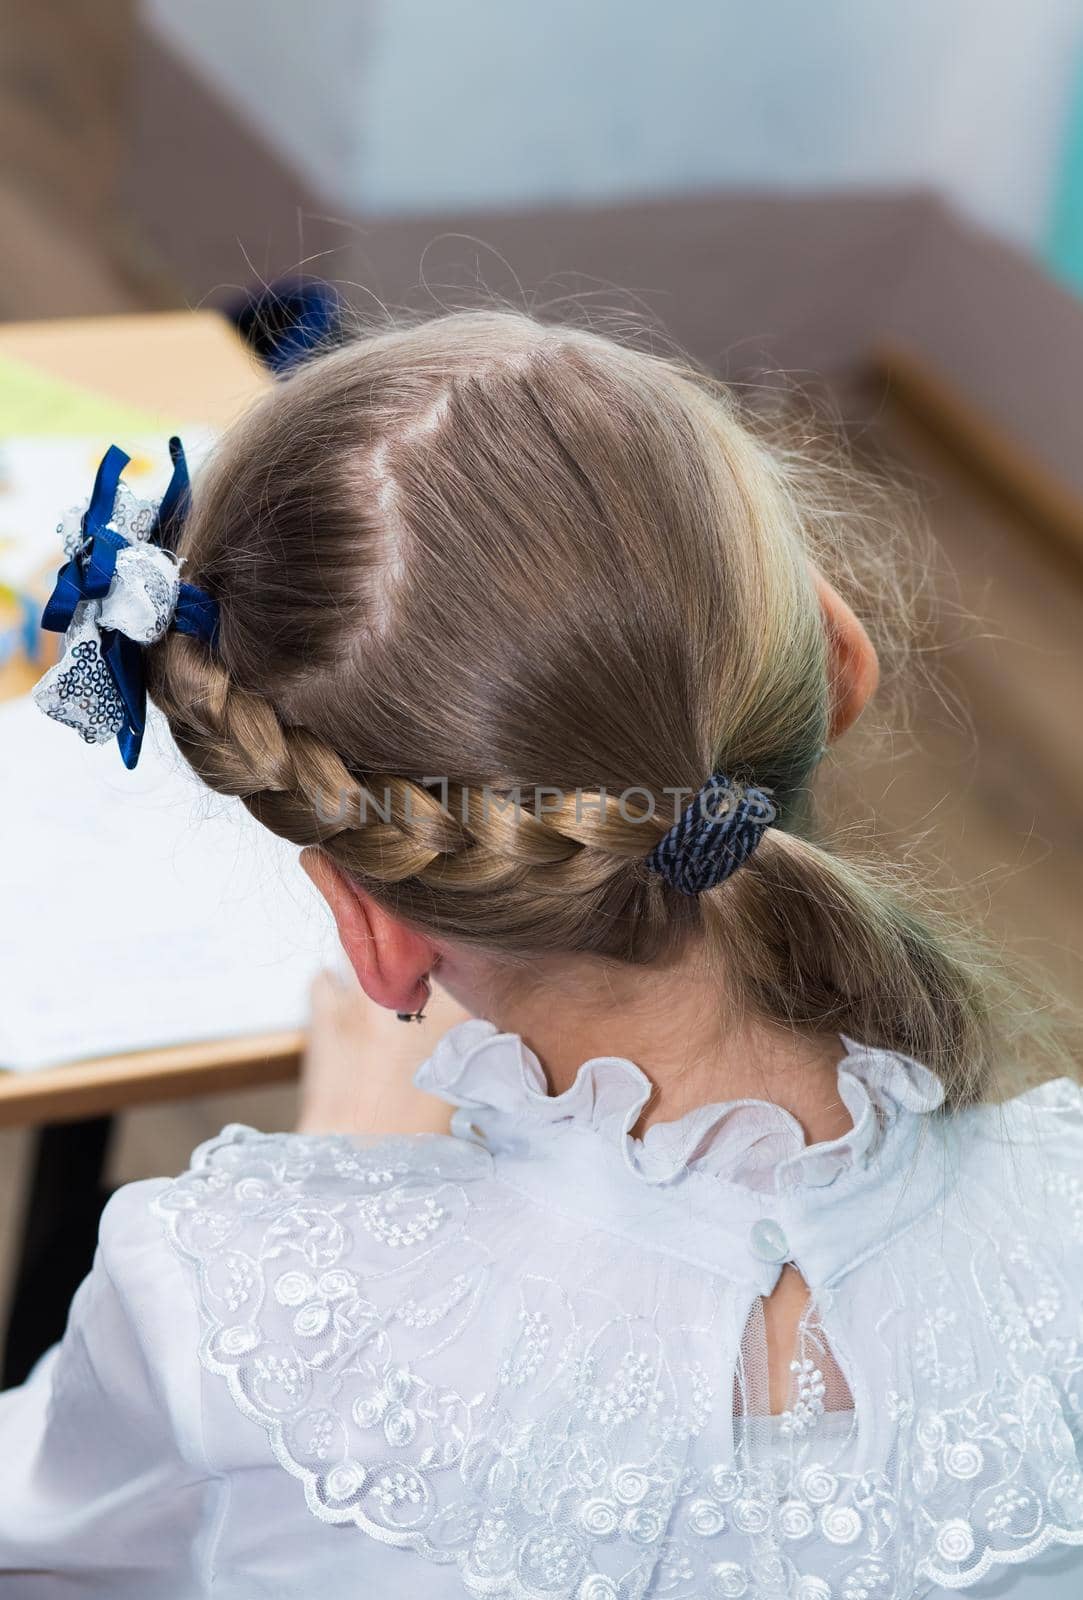 A girl's hairstyle with a braid around her head and a blue bow close-up. Hair styling is done with hairpins and an elastic band. Only the back of the head with a haircut.